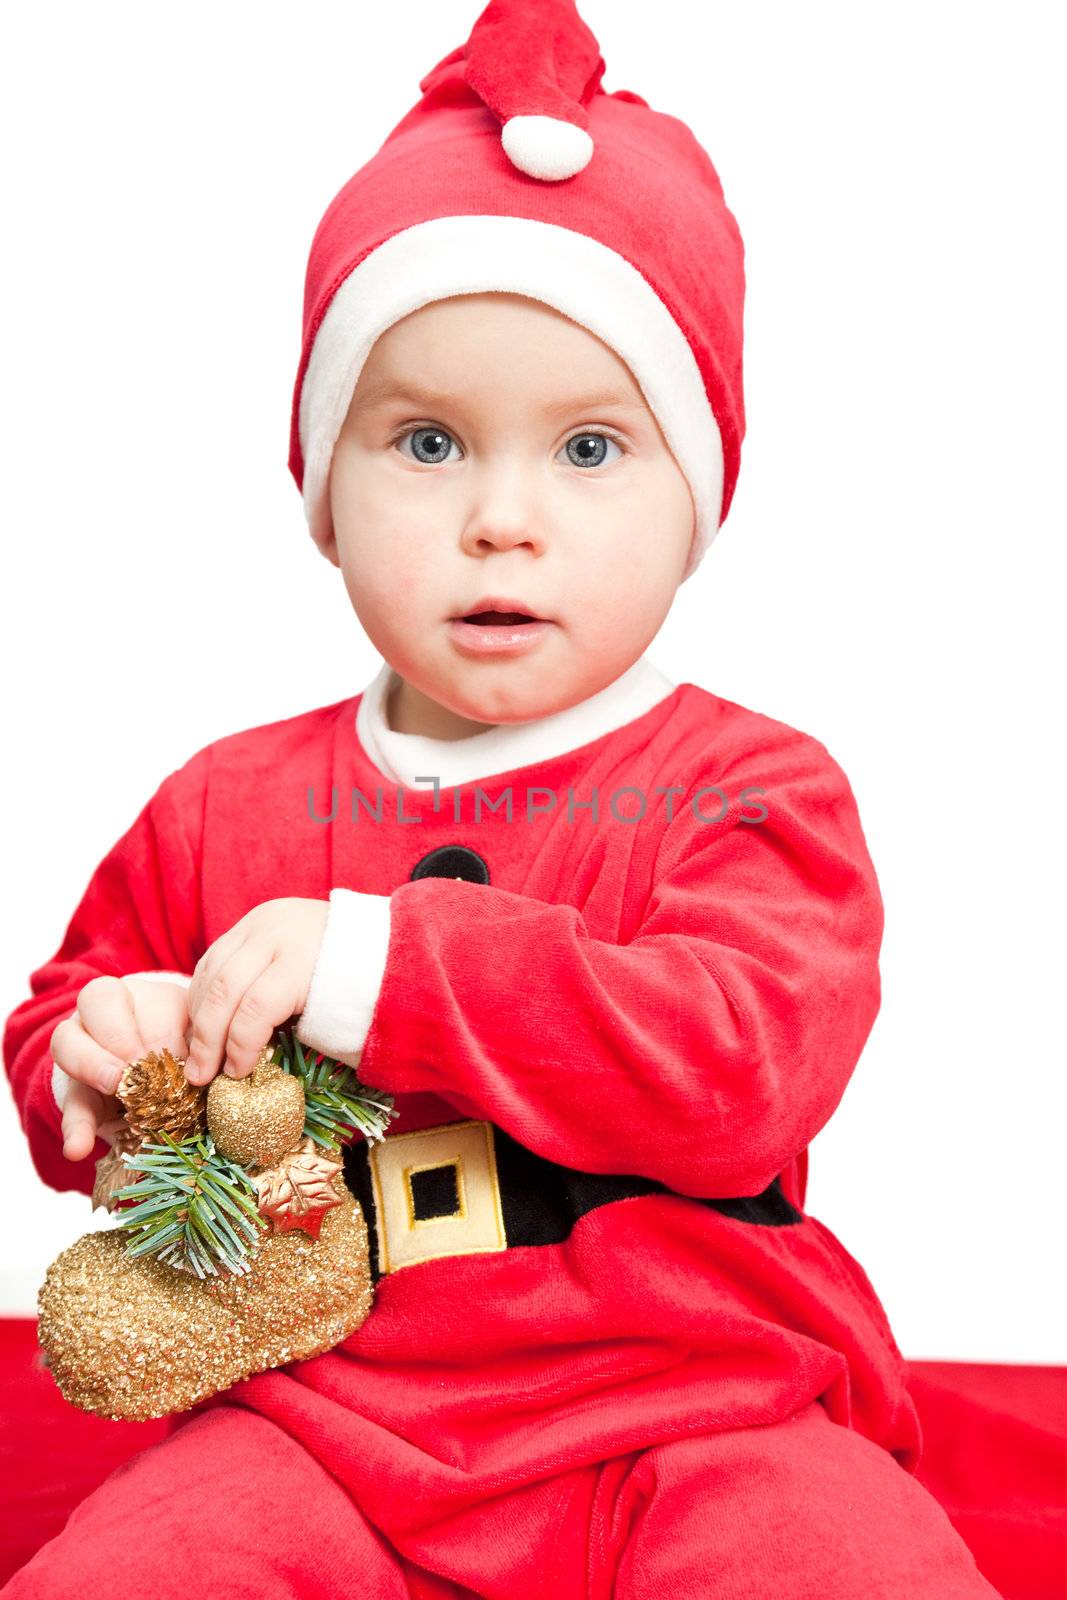 Little baby girl with christmas boot wearing Santa Claus costume on white background